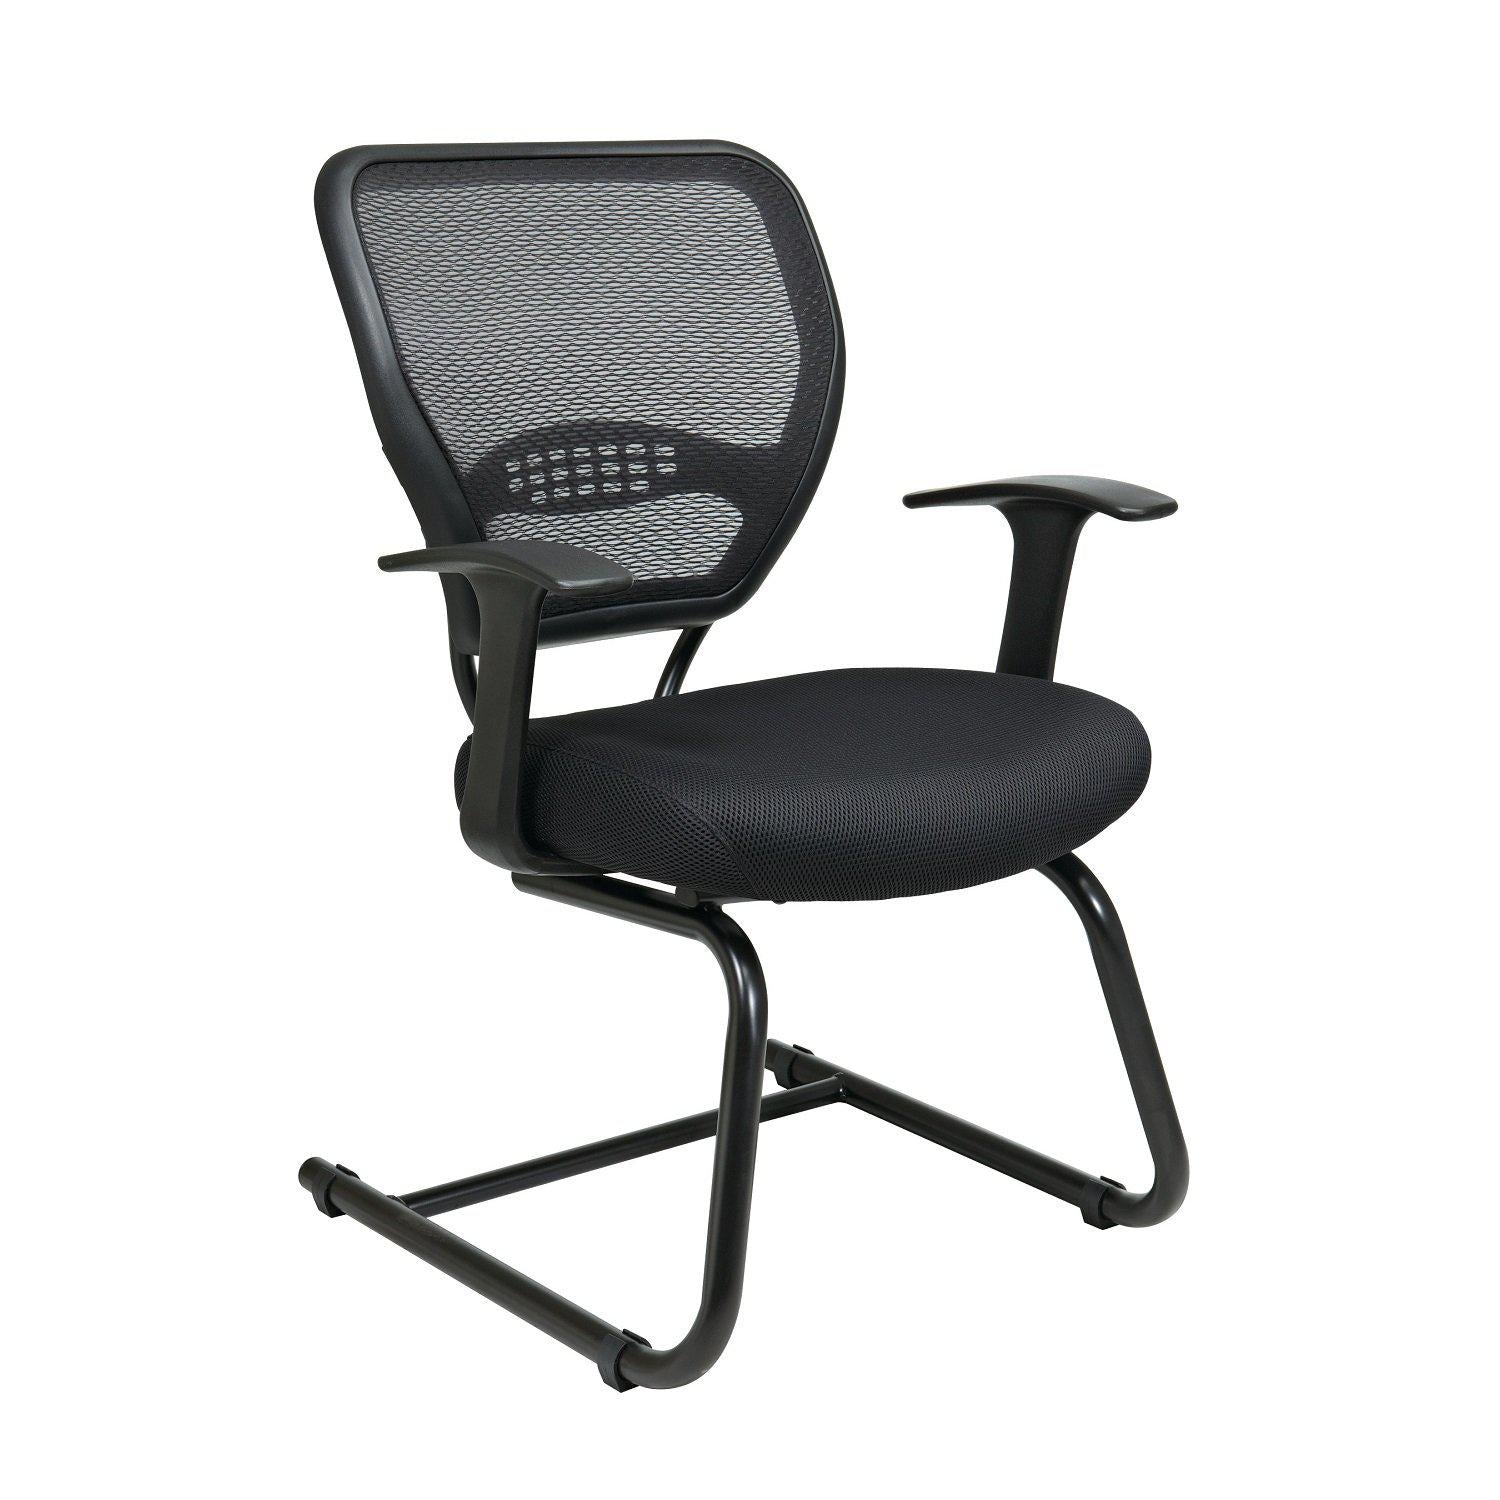 Professional Dark Air Grid® Back Visitor’s Chair with Black Mesh Seat